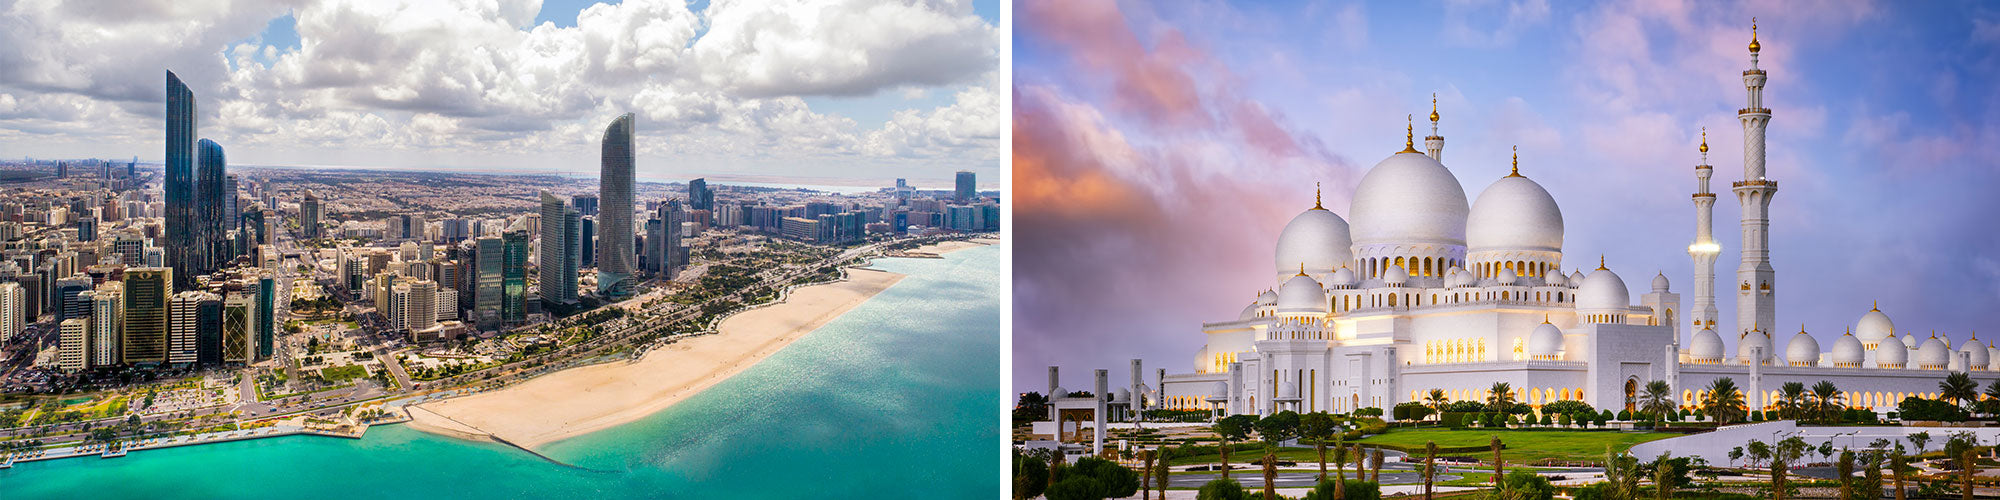 Fine Art Photography Prints of Abu Dhabi - Satellite Images of Earth - Point Two Design